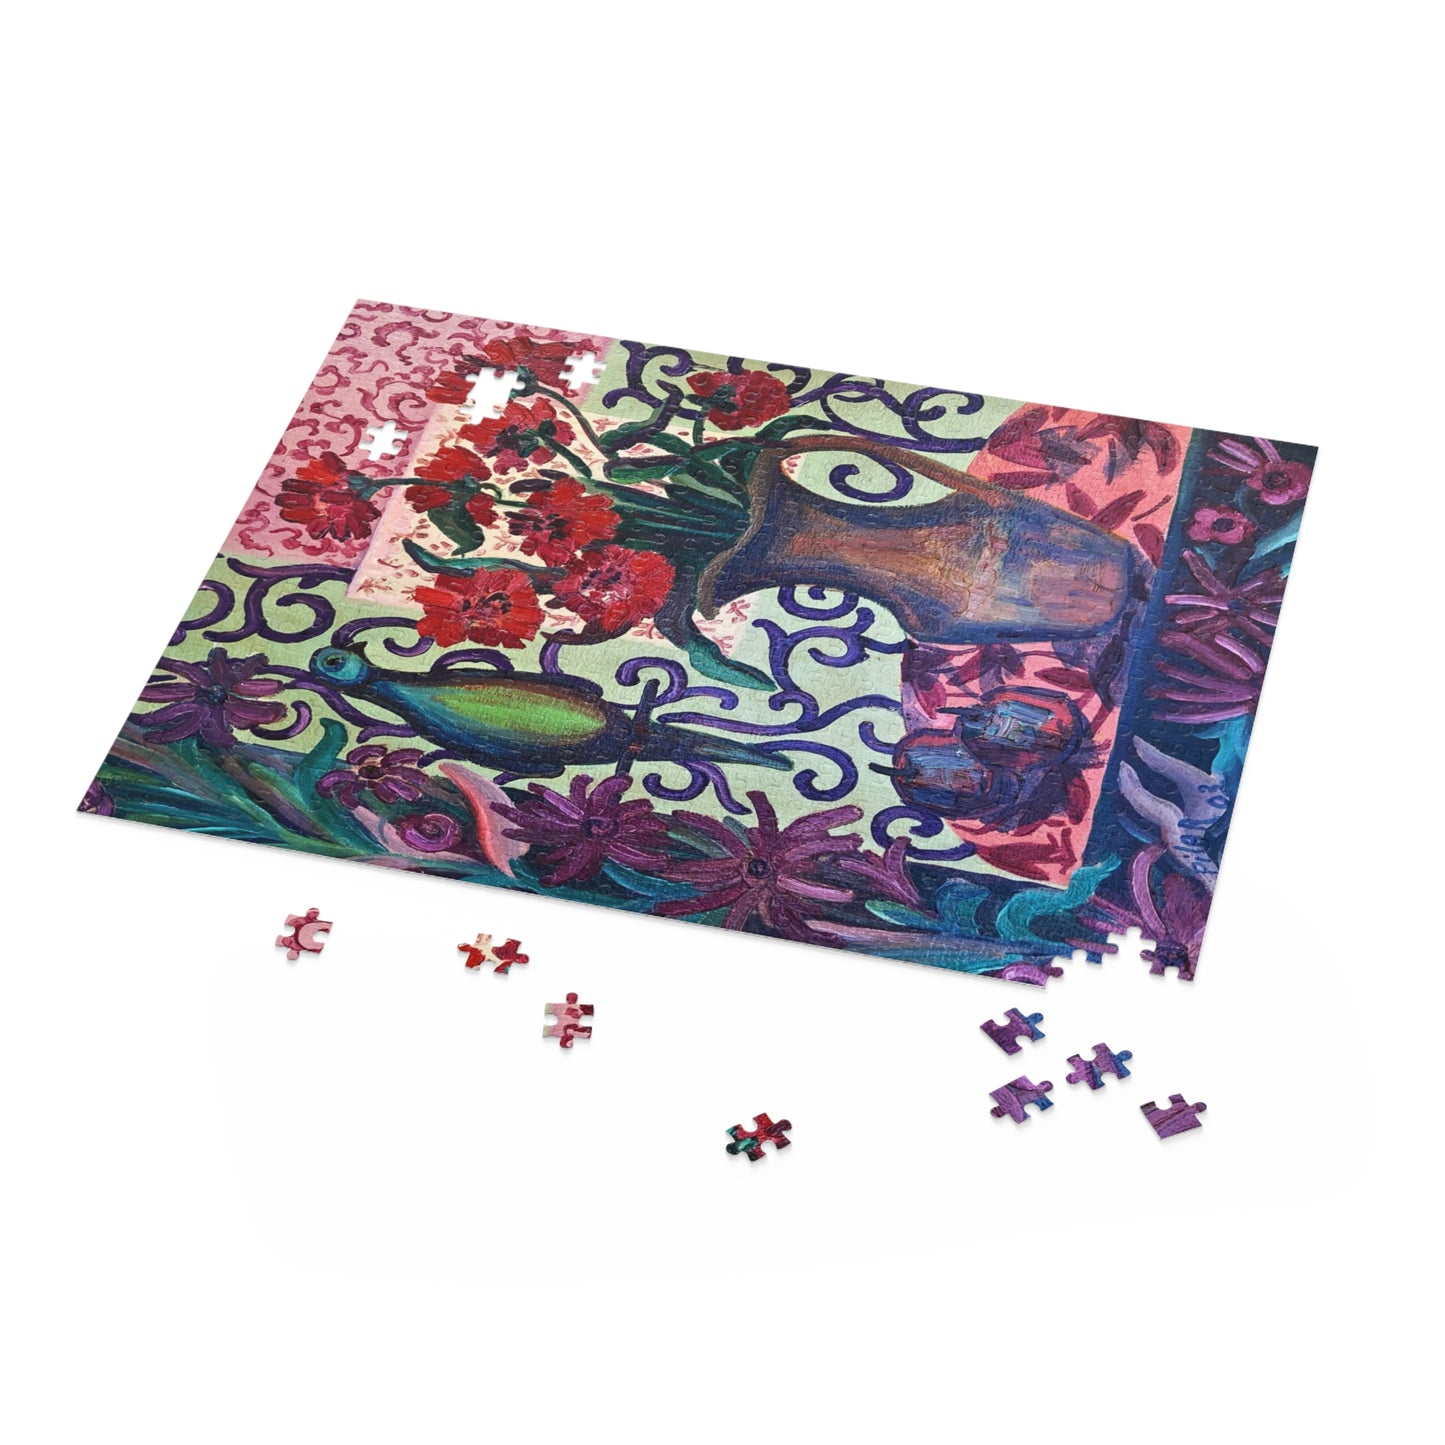 Jigsaw Puzzle- "Green Parrot"